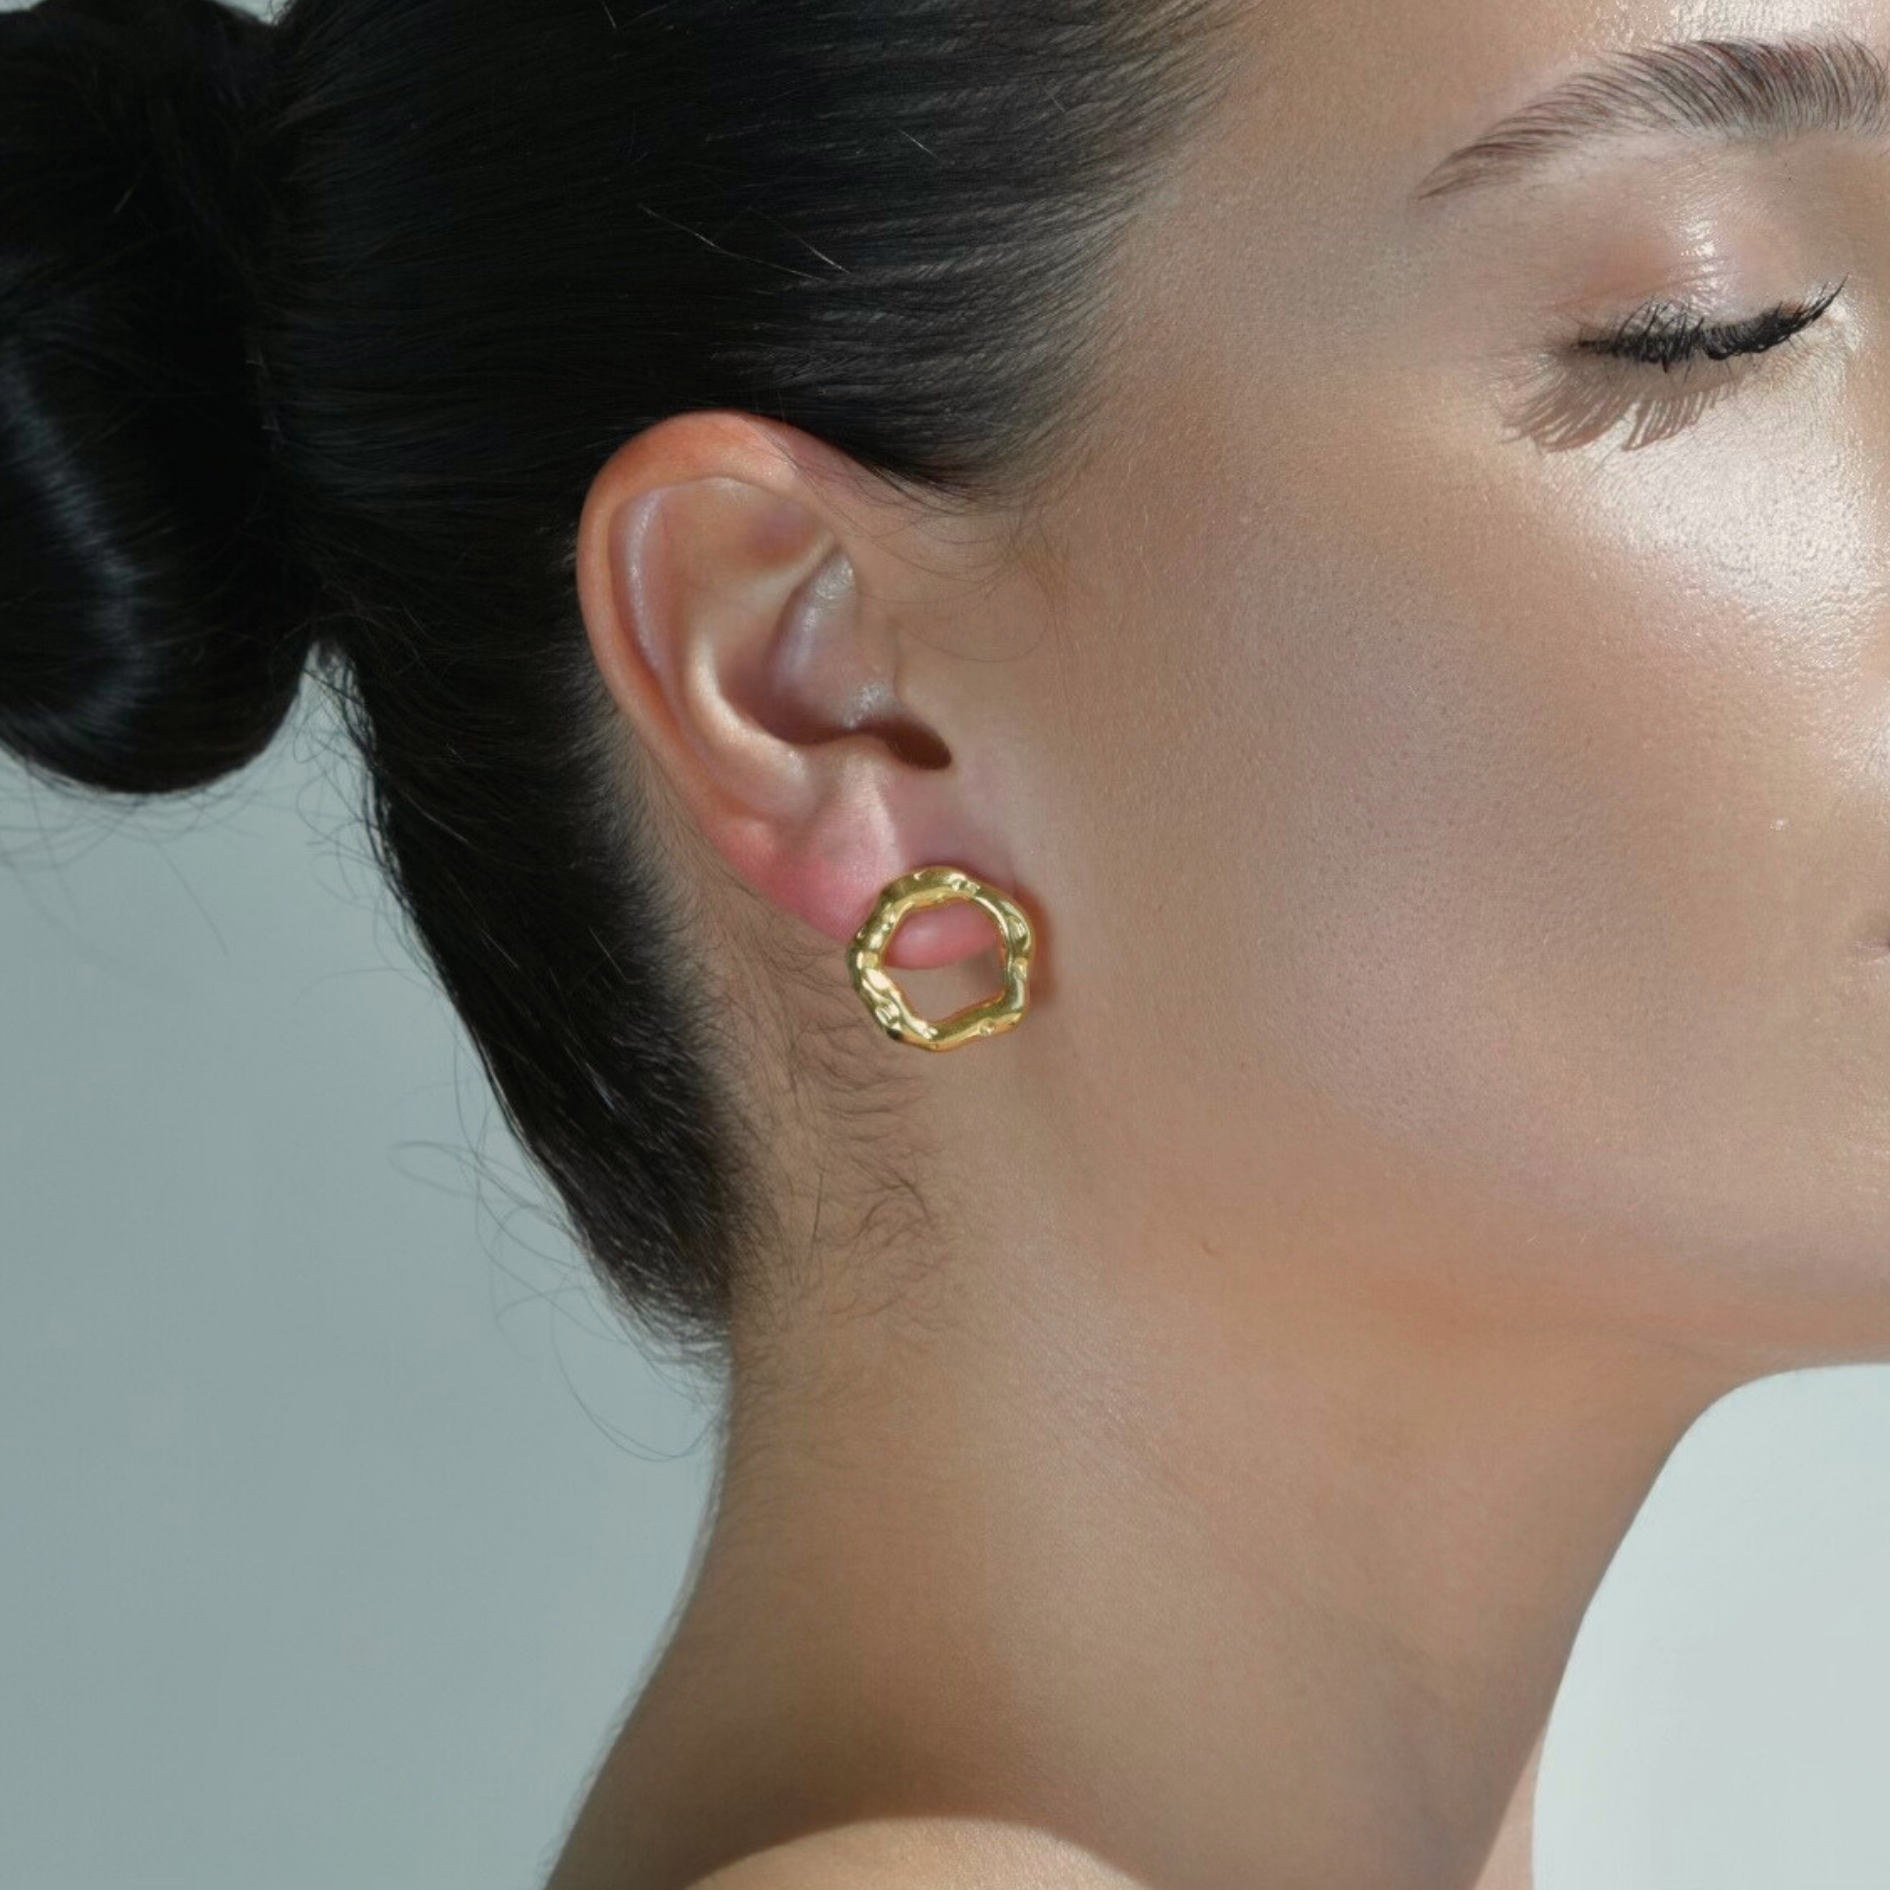 Circle Earrings with irregular shape. Gold plated with texture that imitates movement.